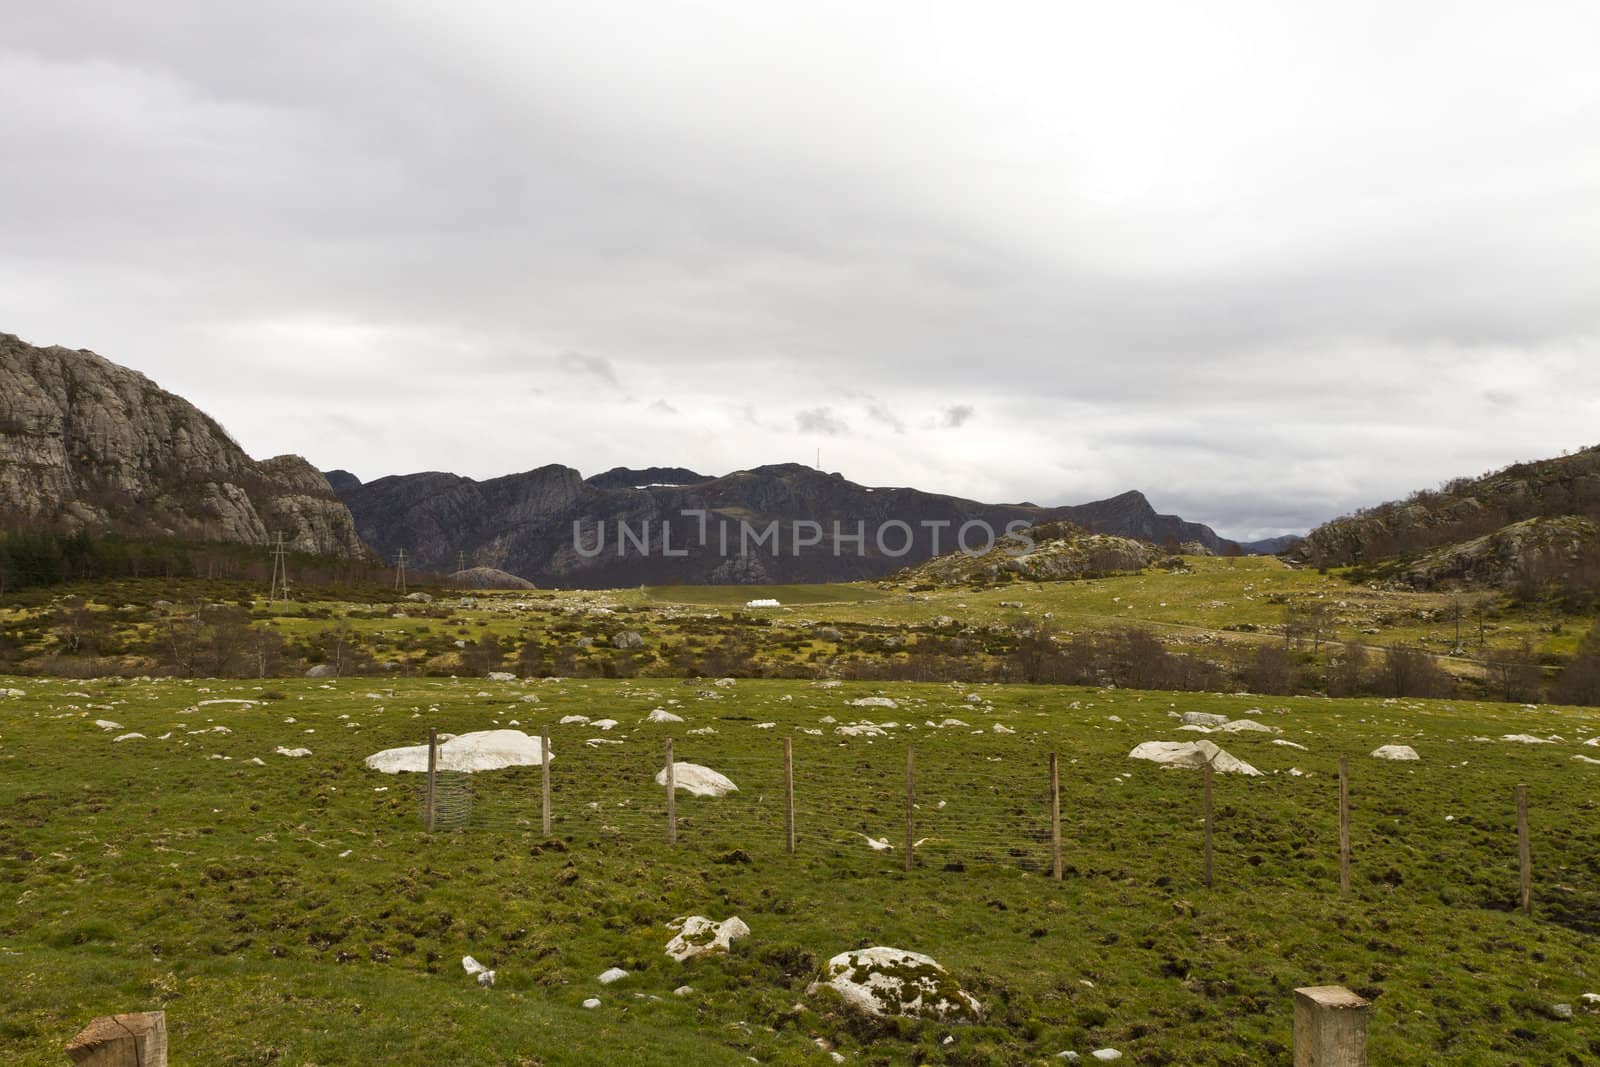 rural grasslands in norway with mountains in background